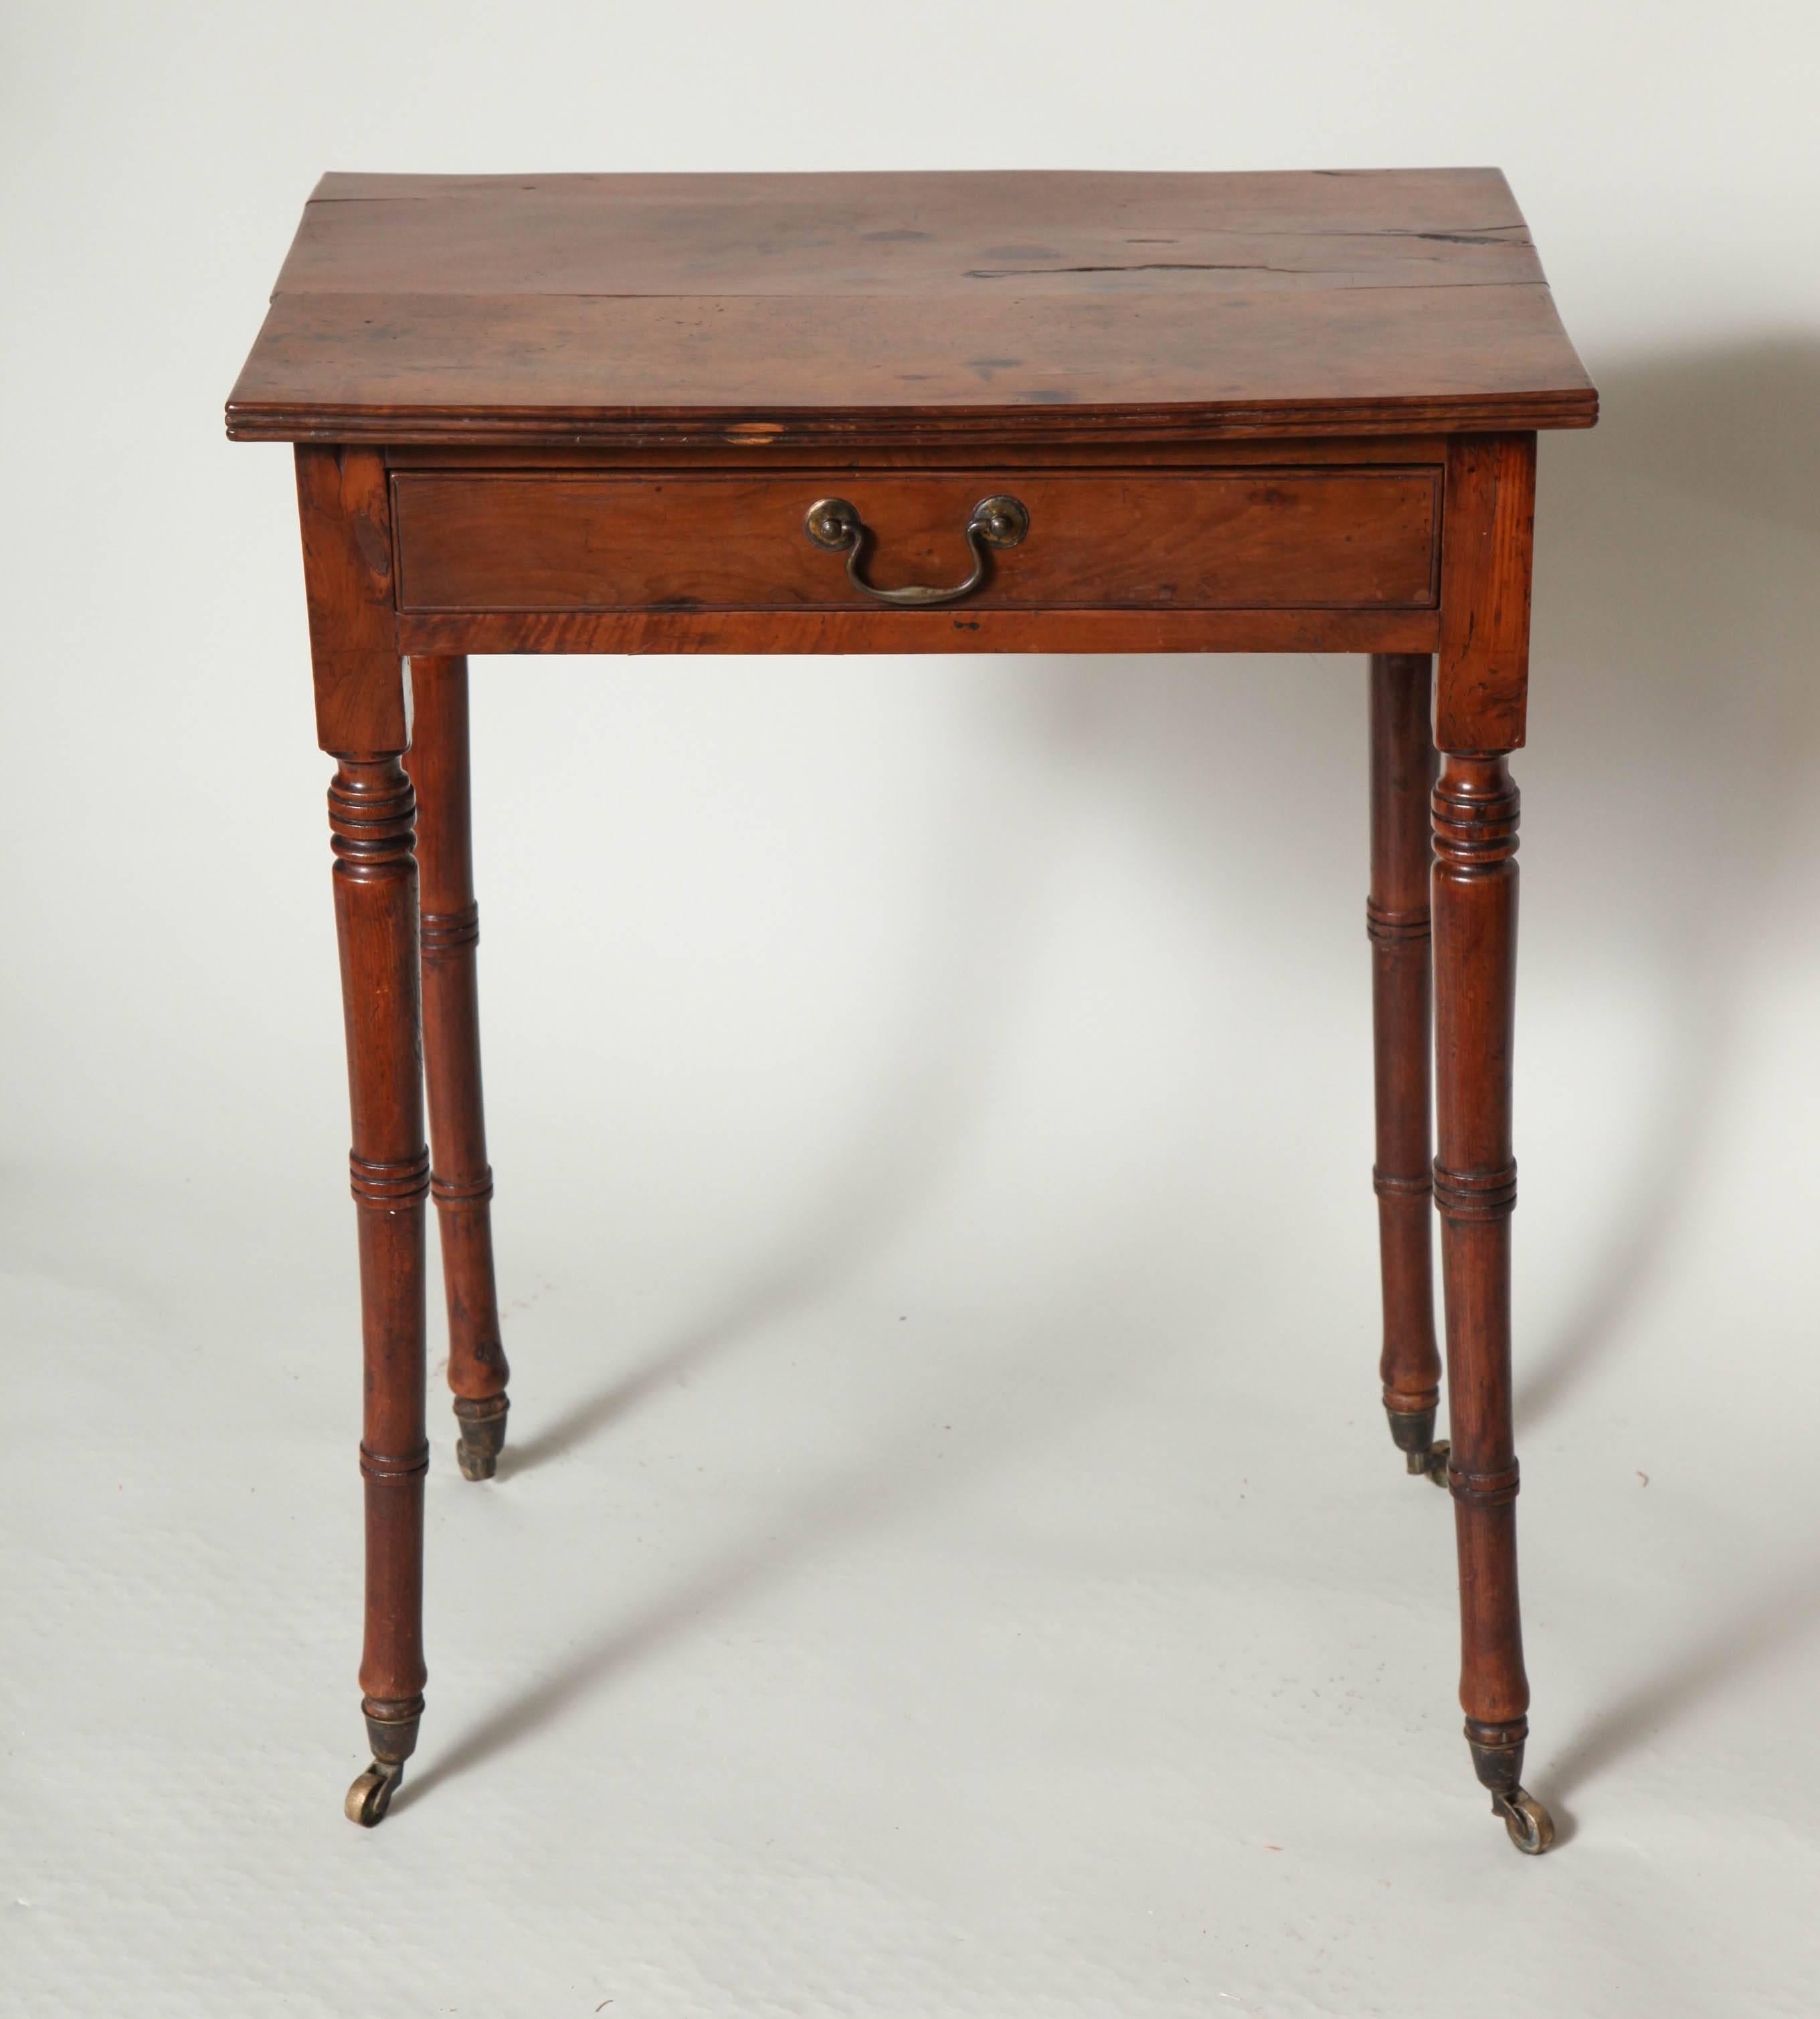 Fine George III yew wood side table, the two plank top with ribbed edge, the single drawer with original swan neck pulls, standing on ring turned tapered legs ending in original brass casters, the legs all slightly out-swept, probably due to the